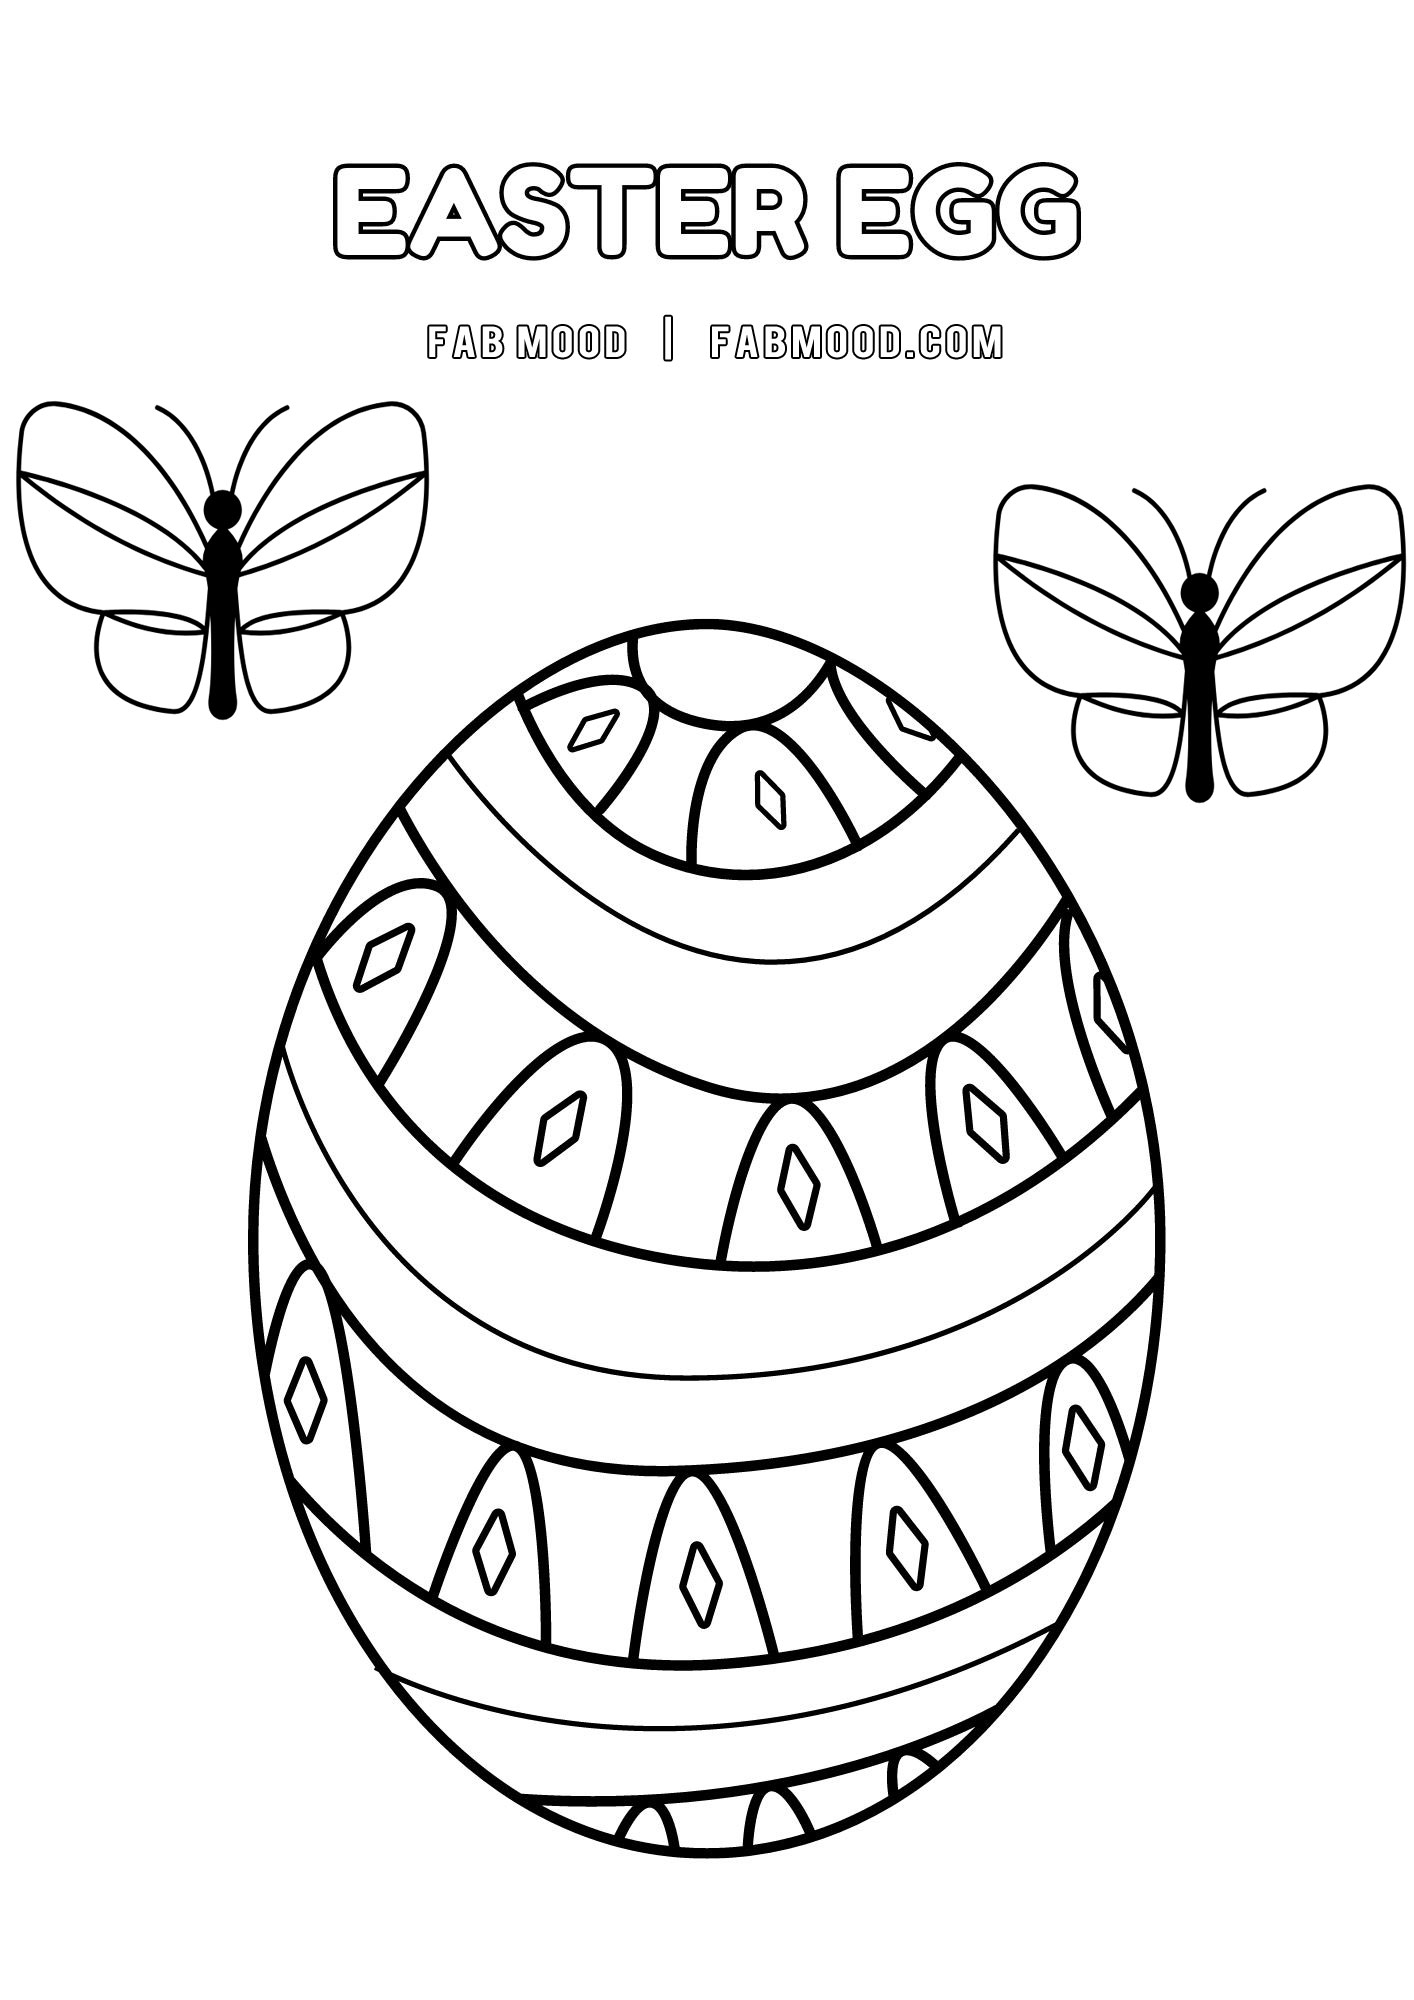 FREE 10 Easter Colouring Pictures : Butterflies & Easter Eggs